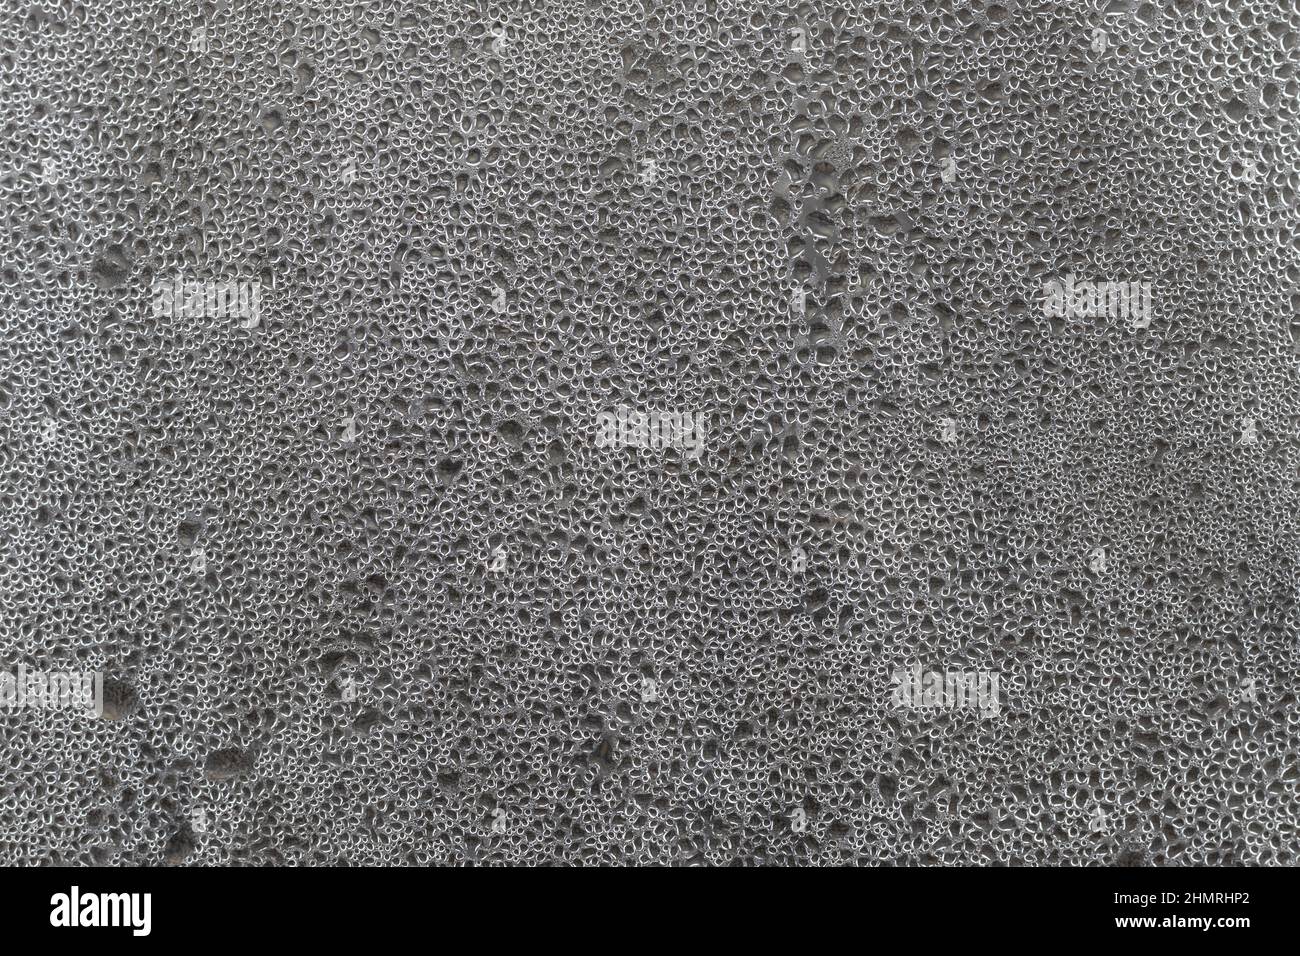 condensation on plastic sheet in winter Stock Photo